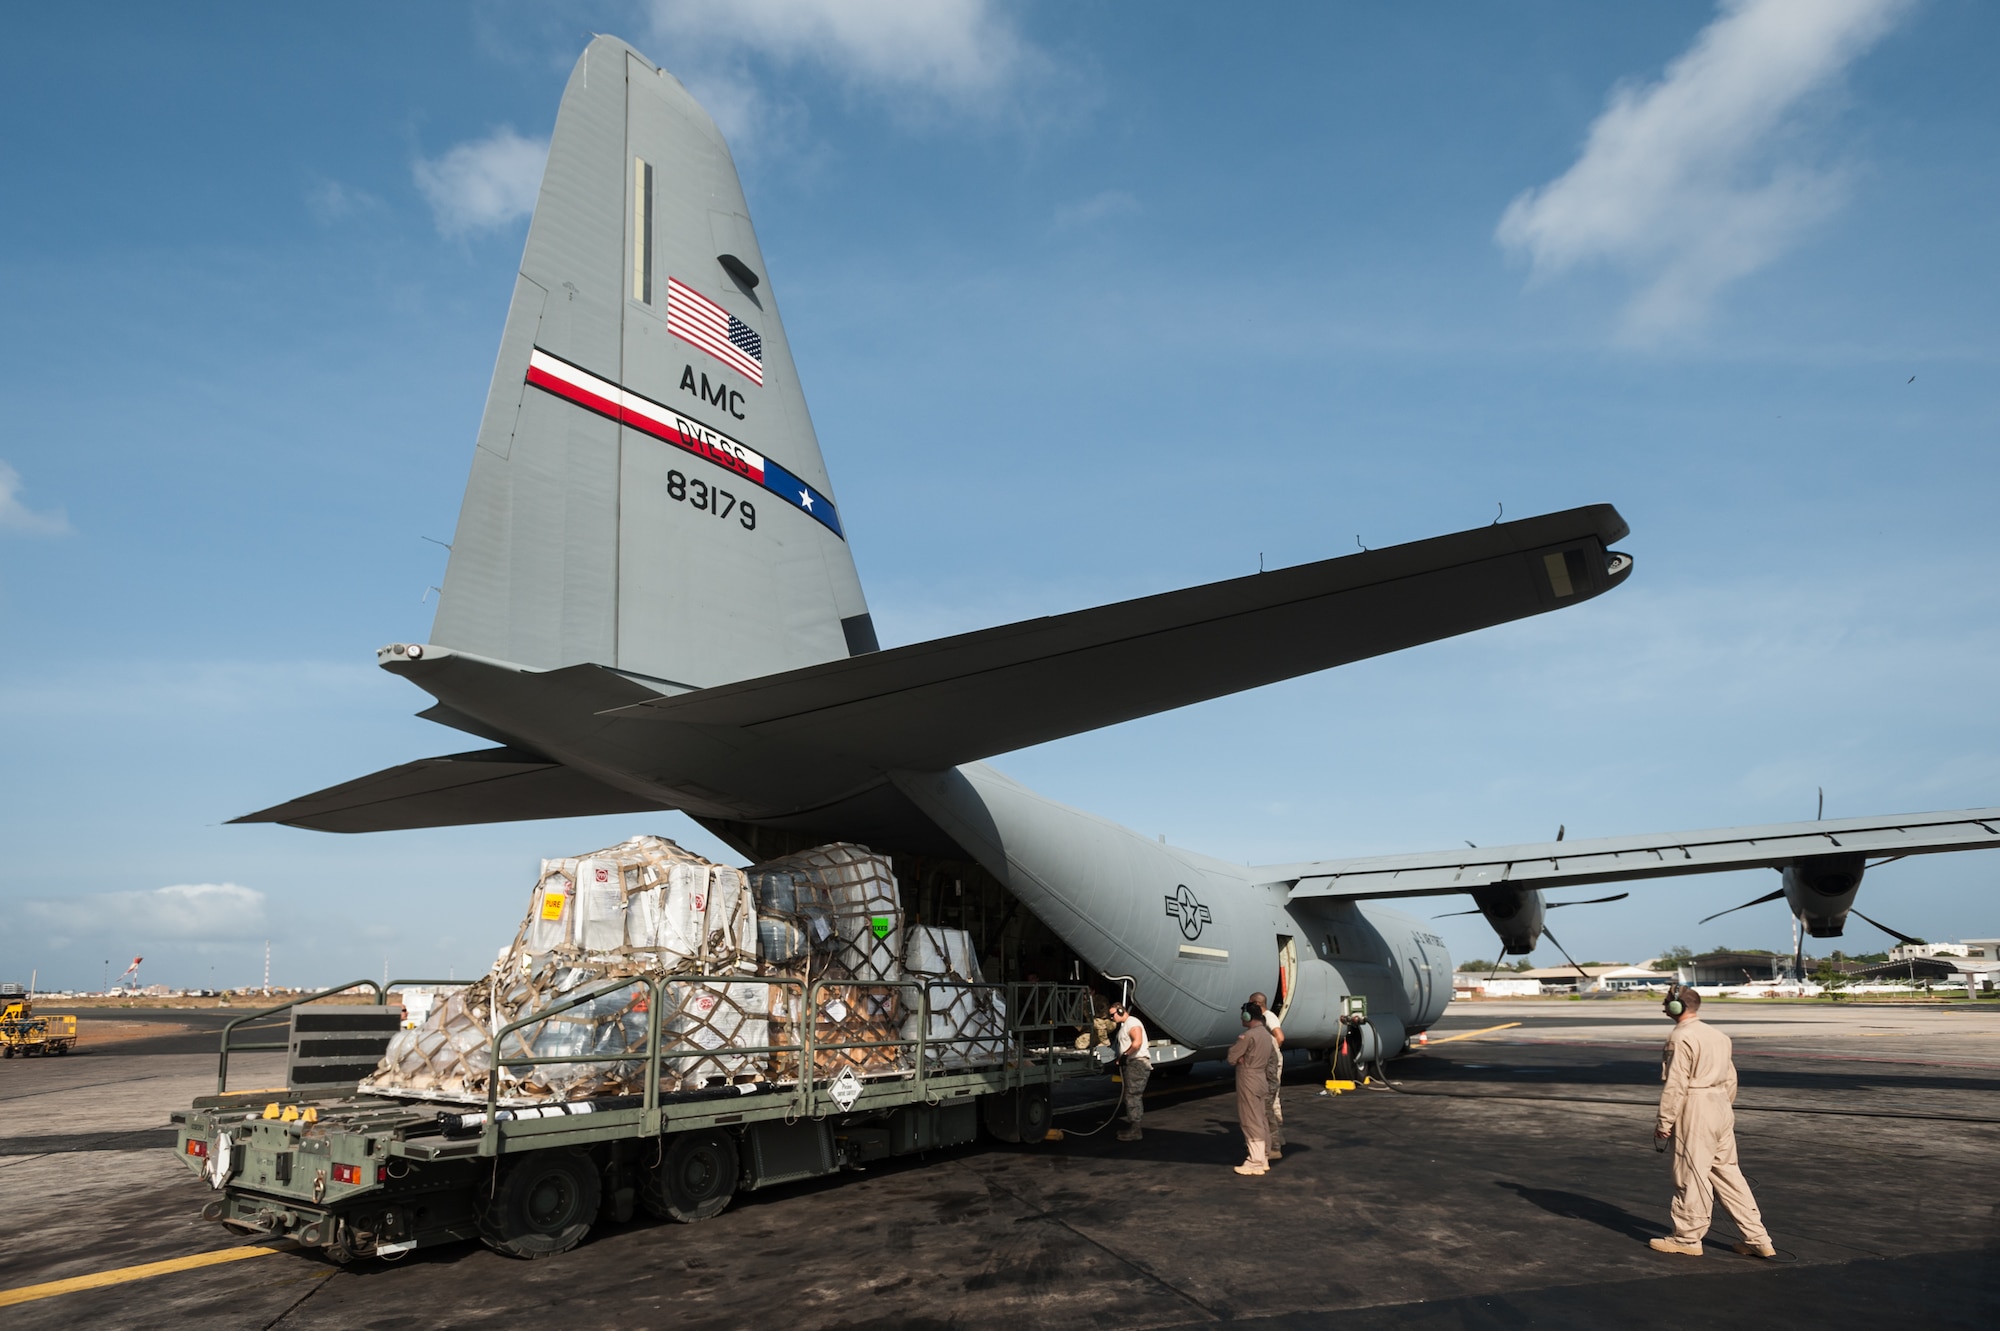 Aerial porters from the Kentucky Air National Guard’s 123rd Contingency Response Group load 8 tons of humanitarian aid and military supplies onto a U.S. Air Force C-130 aircraft at Léopold Sédar Senghor International Airport in Dakar, Senegal, Nov. 4, 2014. The aircraft and crew, from Dyess Air Force Base Texas, are deployed to Senegal as part of the 787th Air Expeditionary Squadron and will fly the cargo into Monrovia, Liberia, in support of Operation United Assistance, the U.S. Agency for International Development-led, whole-of-government effort to contain the Ebola virus outbreak in West Africa. (U.S. Air National Guard photo by Maj. Dale Greer)